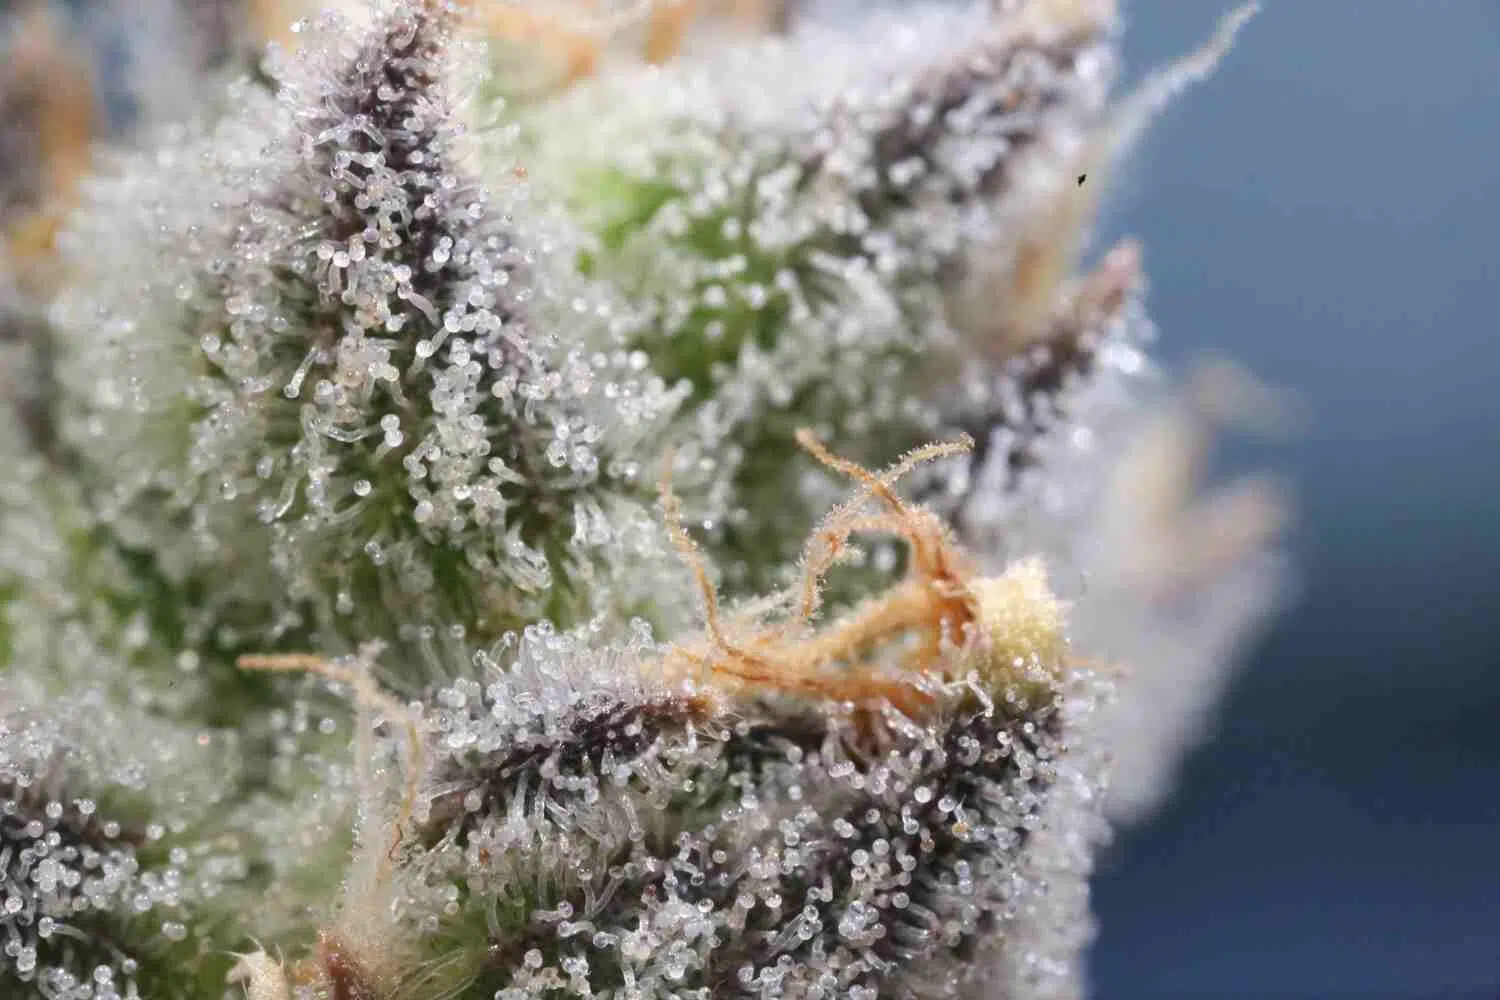 weed bud with trichomes